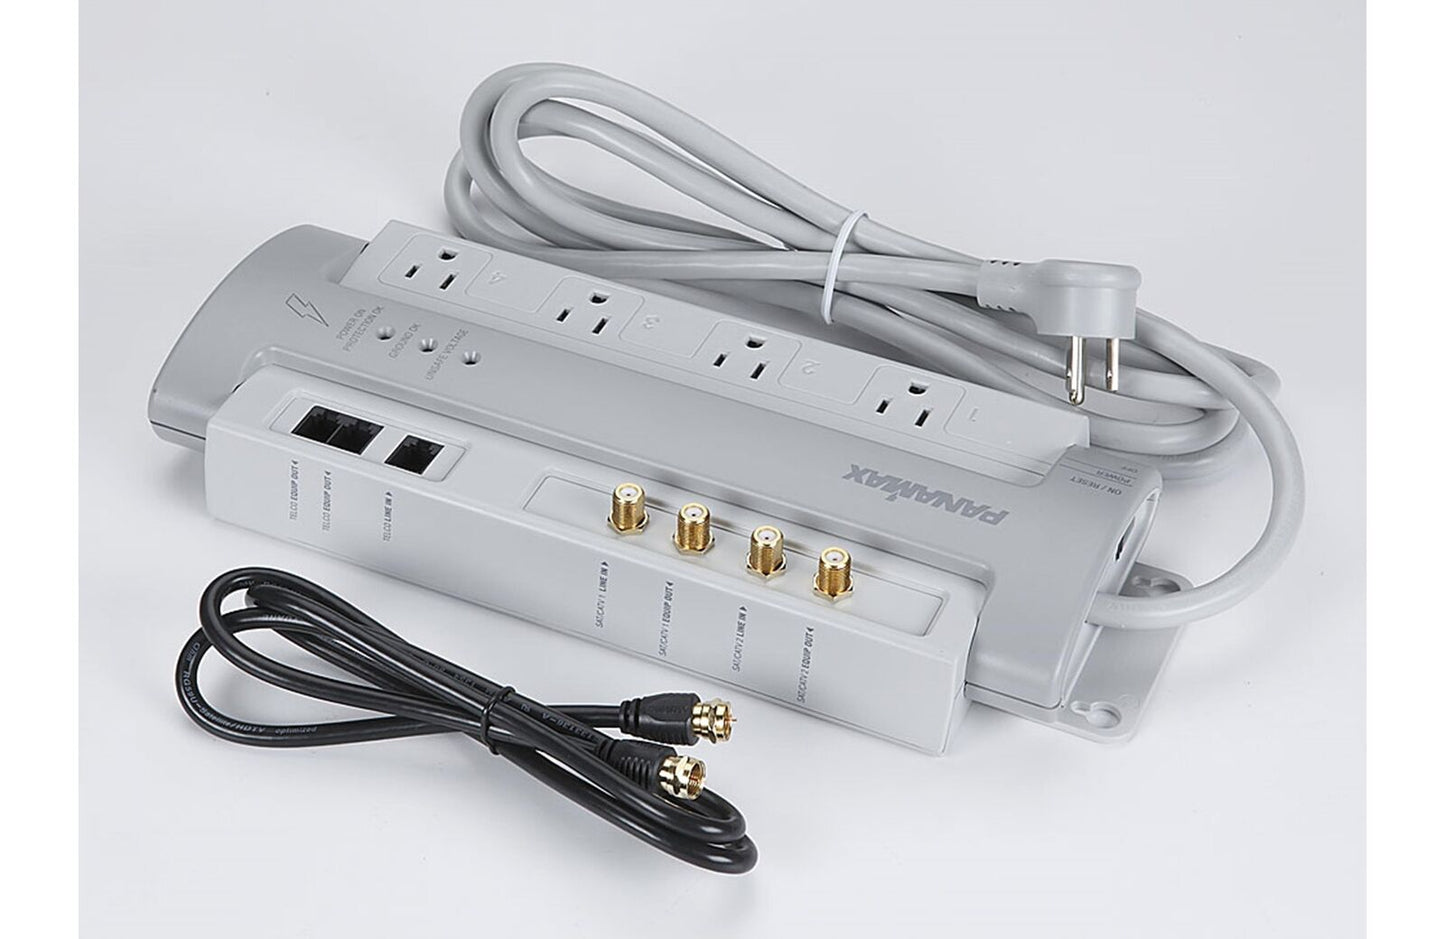 Panamax M8-AV Power line conditioner and surge protector